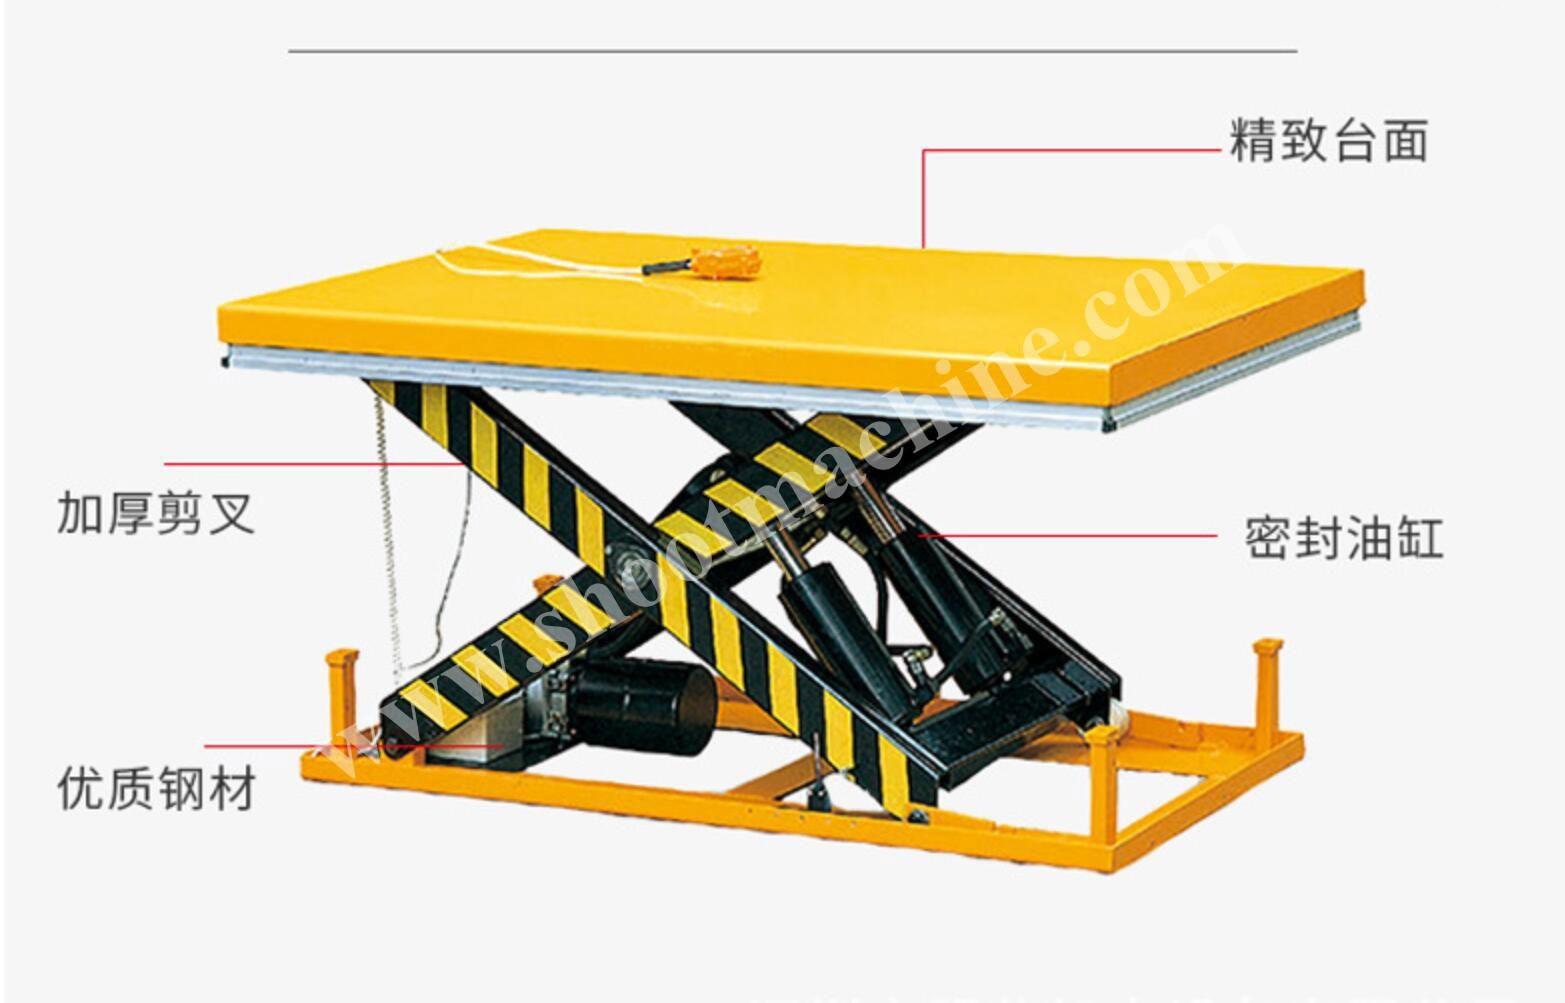 Electrical Hydraulic Lift Table, SH71001 3